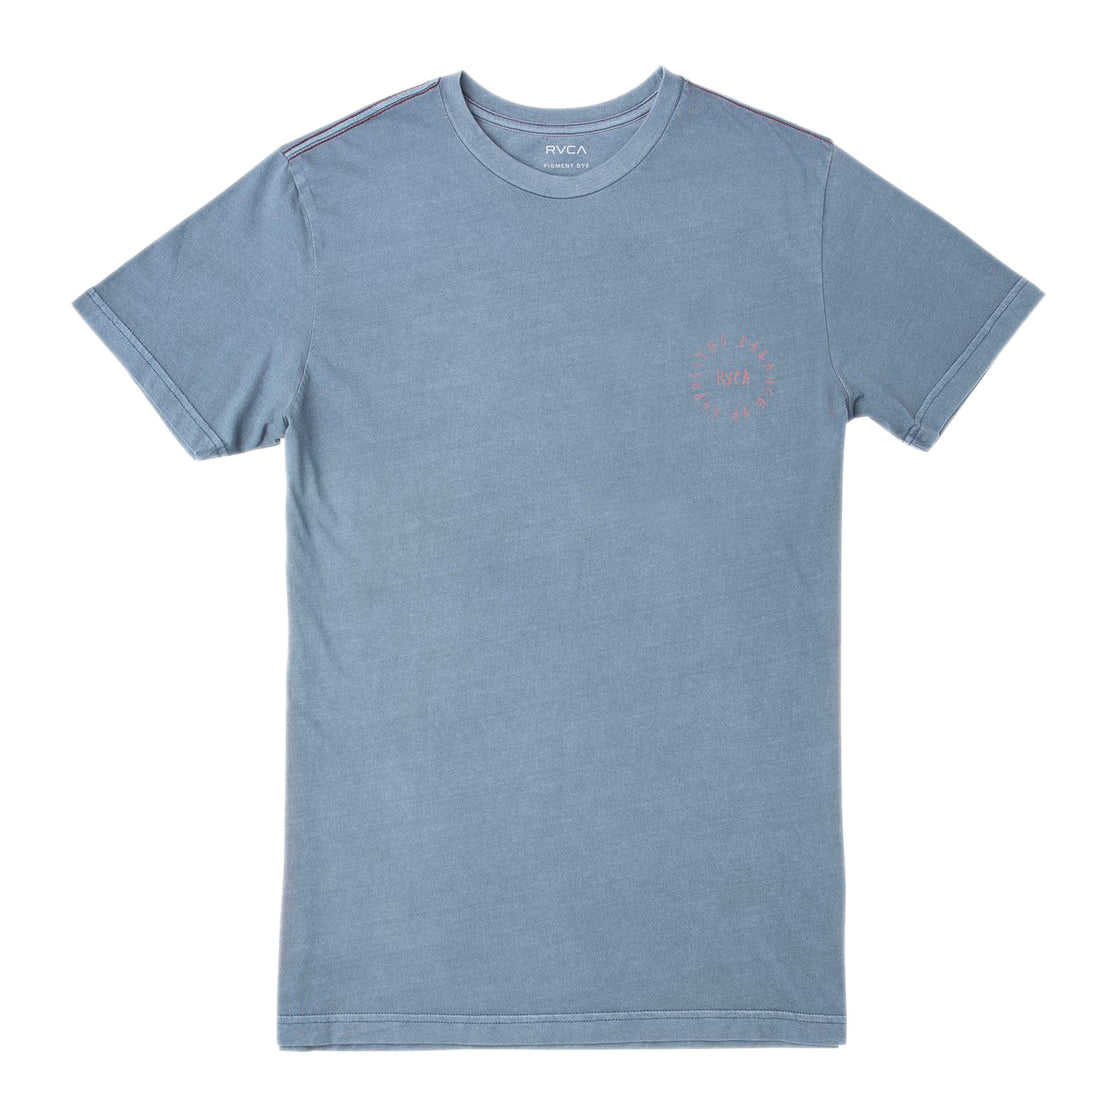 RVCA Hortonsphere SS Tee CNB-ChinaBlue S